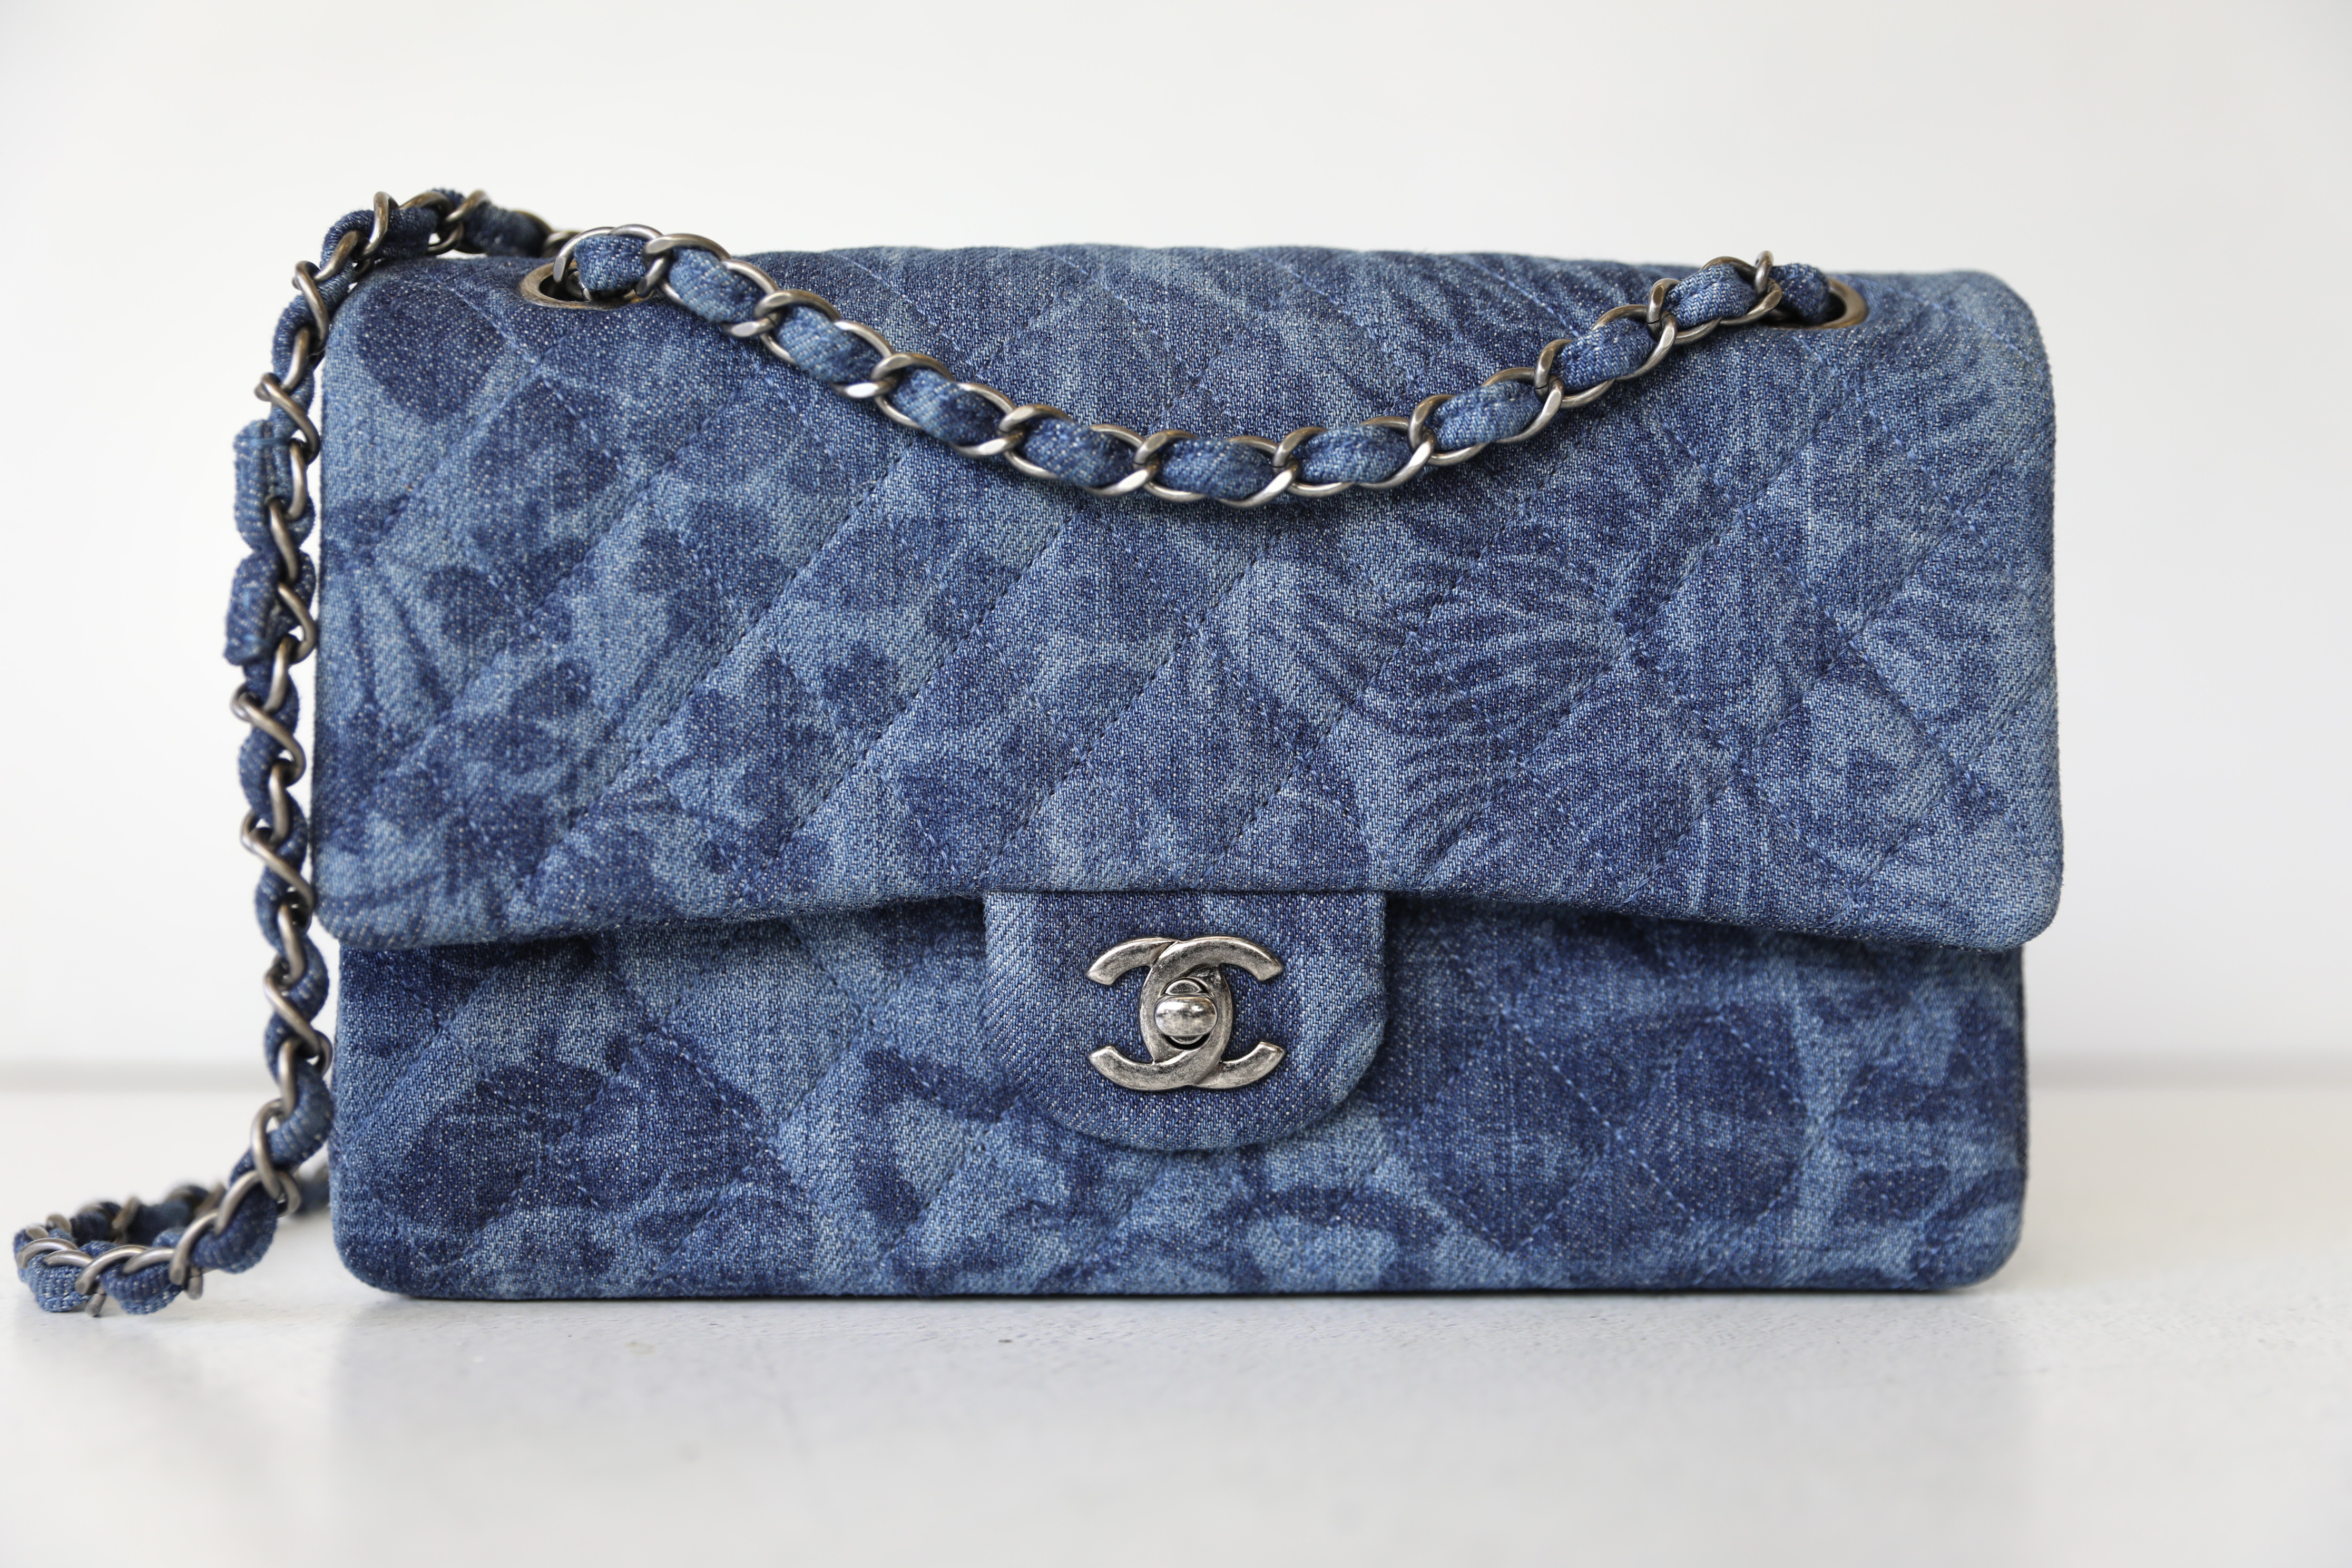 Chanel Flap, Denim Floral Print with Ruthenium Hardware, Preowned